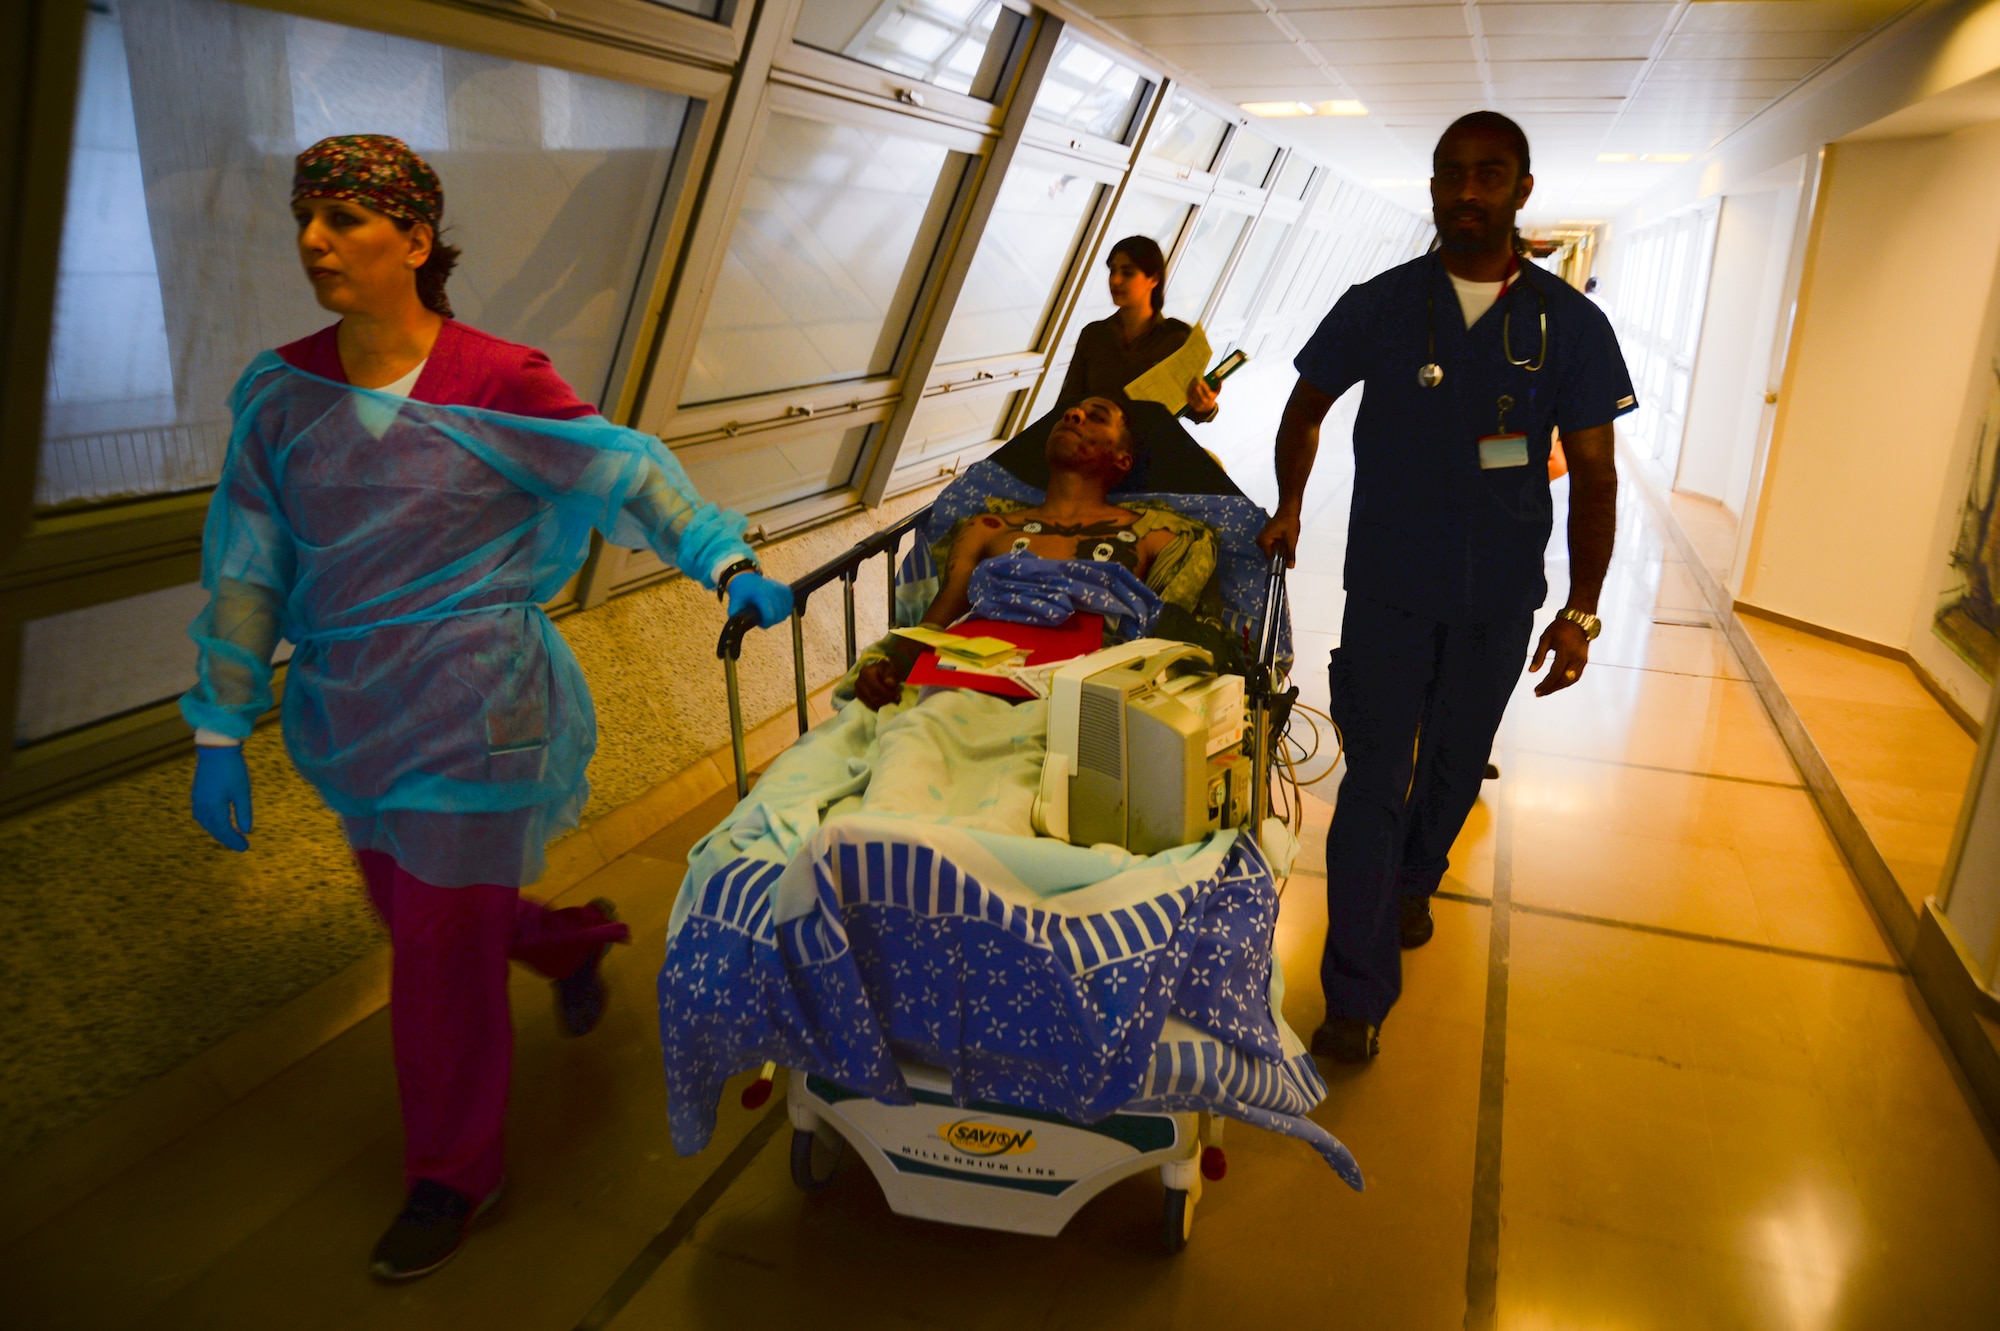 Israeli medics transport Army Private 1st Class James Black through a corridor during a simulated medical evacuation May 20, 2014, at Sheba Medical Center near Beer Sheba, Israel. The medical exercise tested both nations' ability to communicate and track transportation of a simulated patient from the scene of an injury, to a hospital, and then to a U.S. military aircraft. Black is a multi-channel radio operator maintainer assigned to the 44th Signal Battalion at Grafenwoehr, Germany. (U.S. Air Force photo illustration/Staff Sgt. Joe W. McFadden)